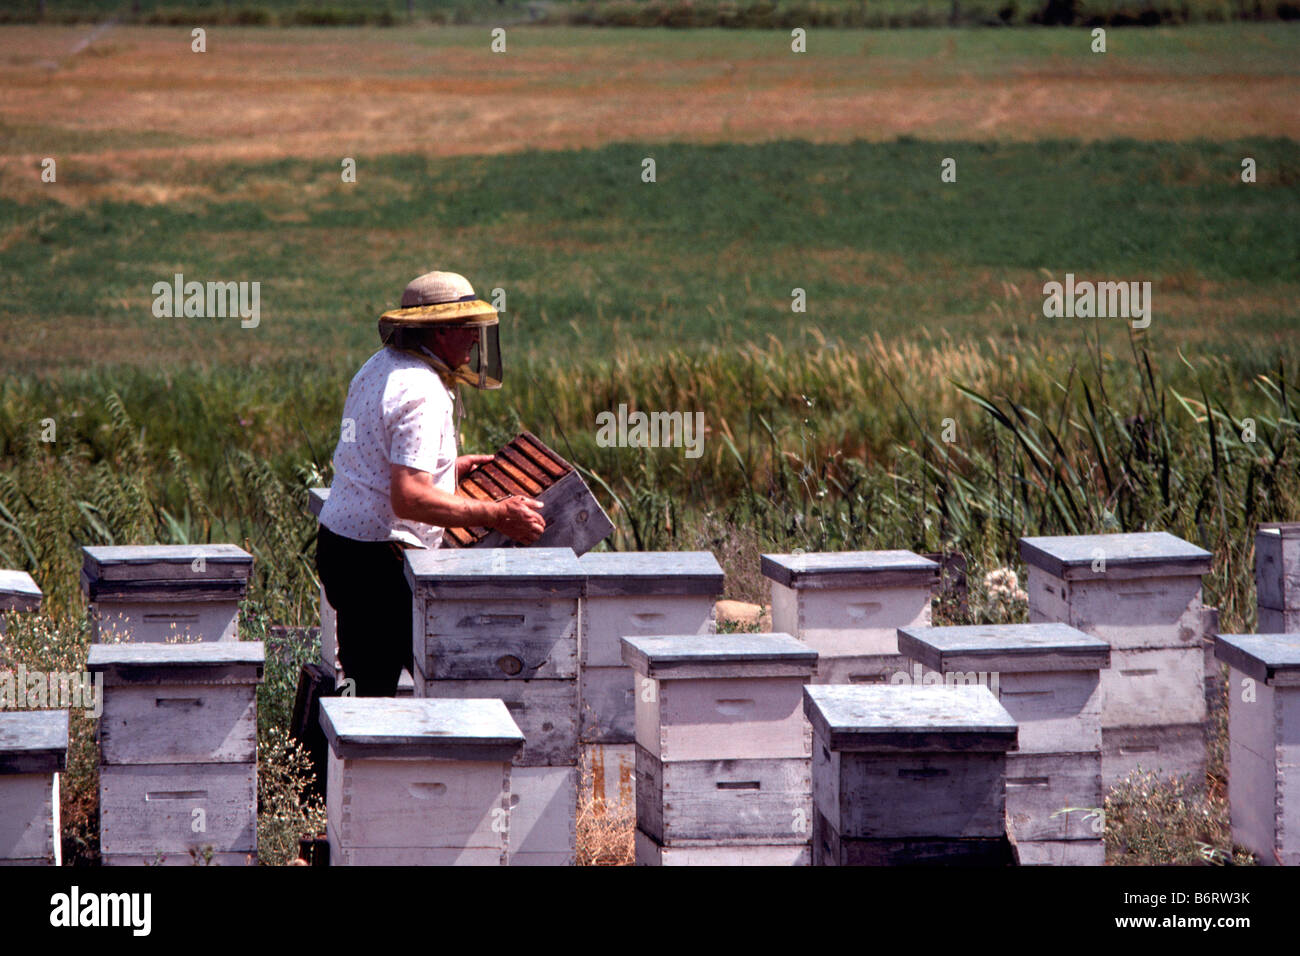 Beekeeper holding Honeycomb from Beehives in a Field in the Okanagan Valley, BC, British Columbia, Canada Stock Photo